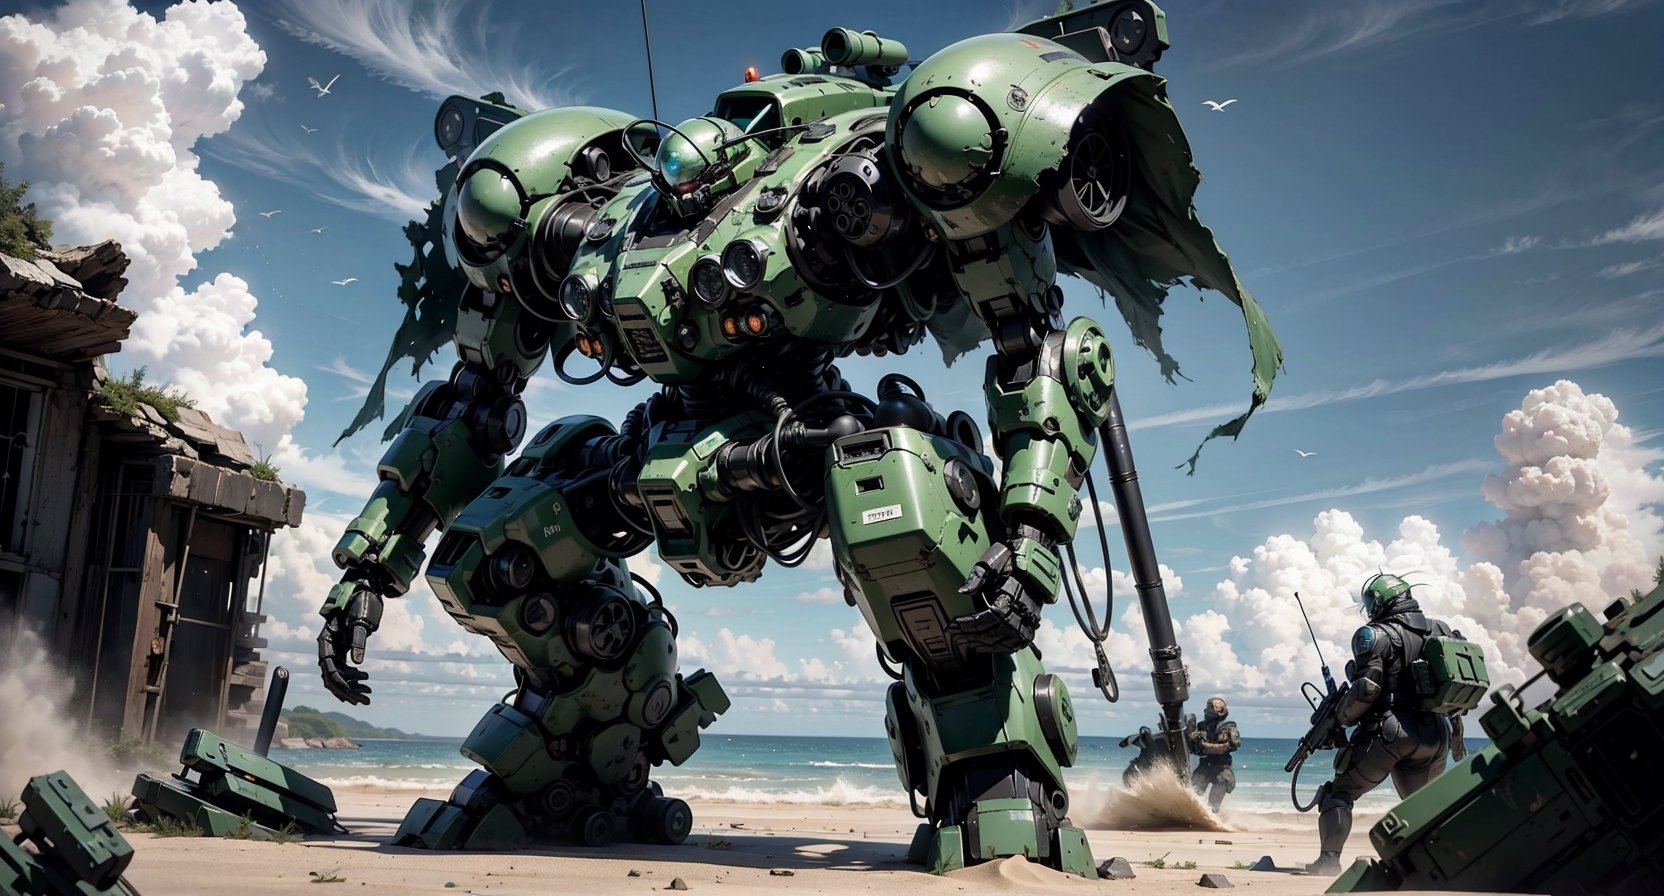 In a post-apocalyptic landscape, a lone Zaku Patrol unit, its armor battered and camouflaged, navigates the sandy dunes of a long-abandoned beach. Its mission: to eliminate any remaining signs of resistance. As it approaches a crumbling middle bridge, it spots a cluster of overgrown plants hiding another, larger mech. The Zaku readies its futuristic Tomson gun, gripping it tightly, preparing for battle. With a deafening roar, it opens fire on the concealed machine, sending metal shards and sand flying in every direction. The other mech, caught off guard, tries to retaliate but is no match for the skilled Zaku. As the battle rages on, the Zaku's armor begins to show signs of wear and tear. However, it remains determined to complete its mission, relentlessly shooting at the other mech until it finally falls silent. Victory is achieved, but at a great cost. The once-proud Zaku now lies wounded on the sandy shore, its armor dented and its systems failing. The sound of the ocean waves crashing against the shore serves as a haunting reminder of the world that once was.